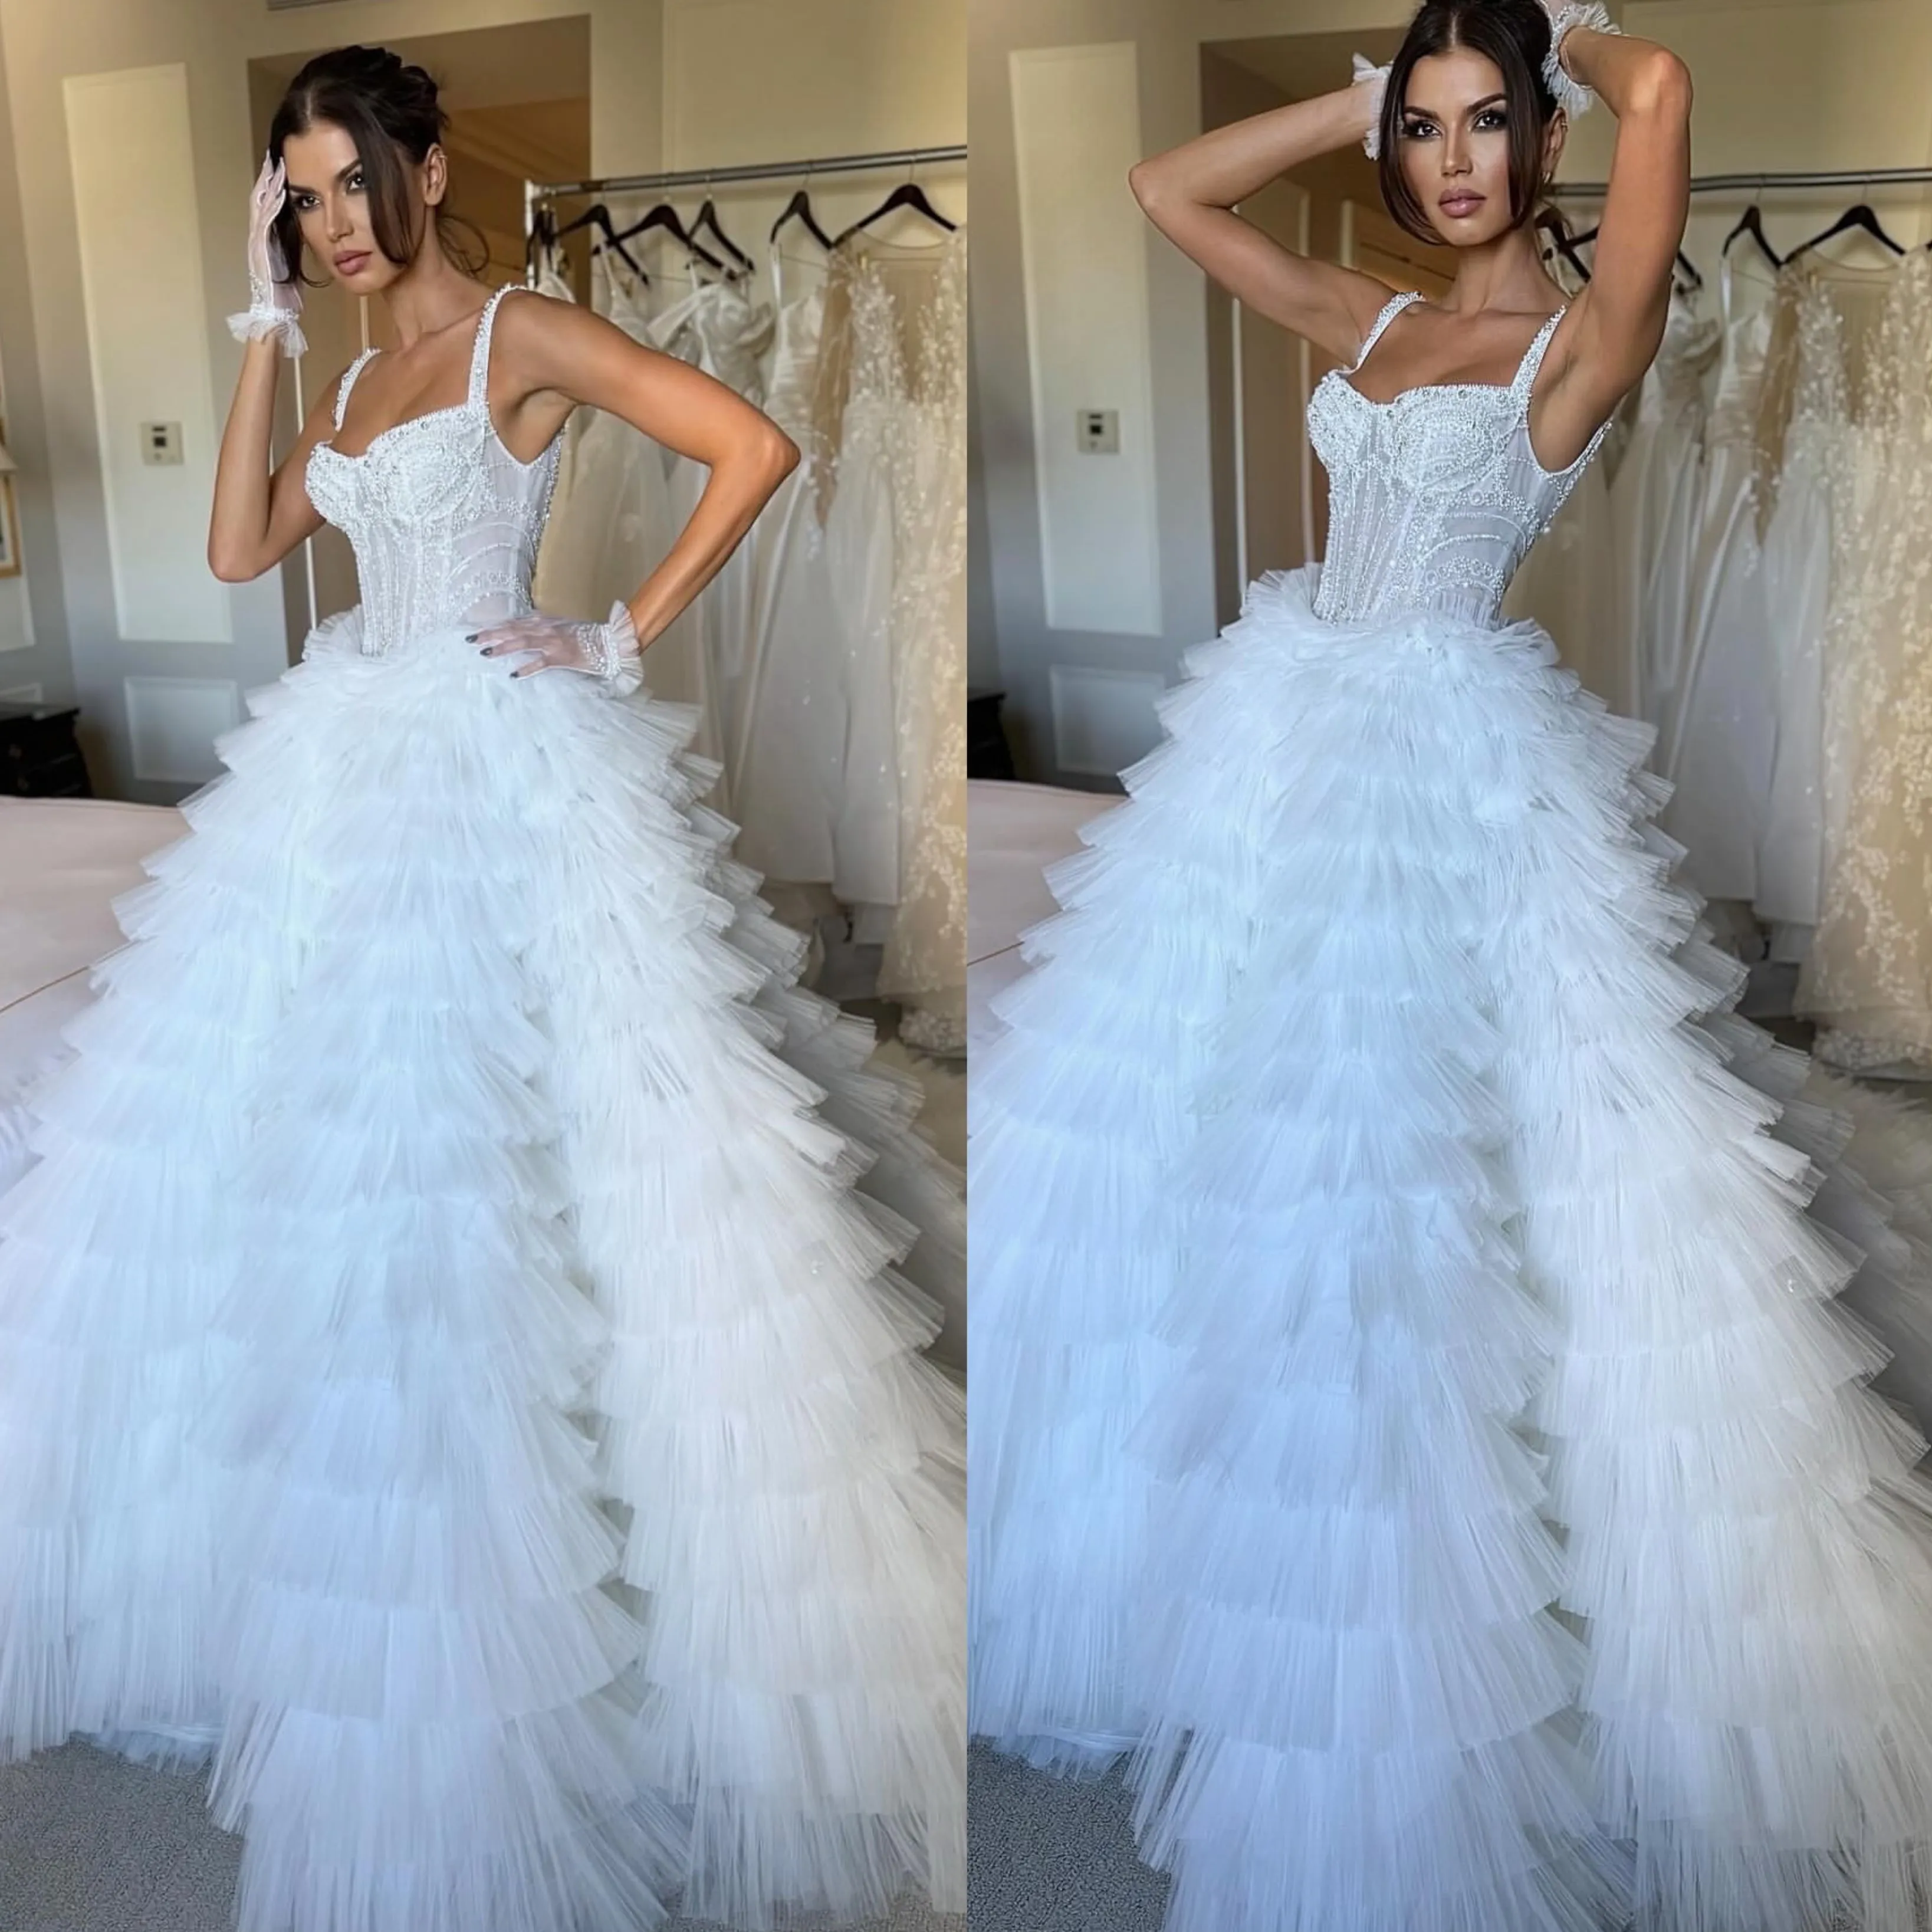 Line Modern A Dress for bride beaded sequins straps Wedding Dresses bridal gowns vestidos novia tiered skirt ruched country robe de mariage es